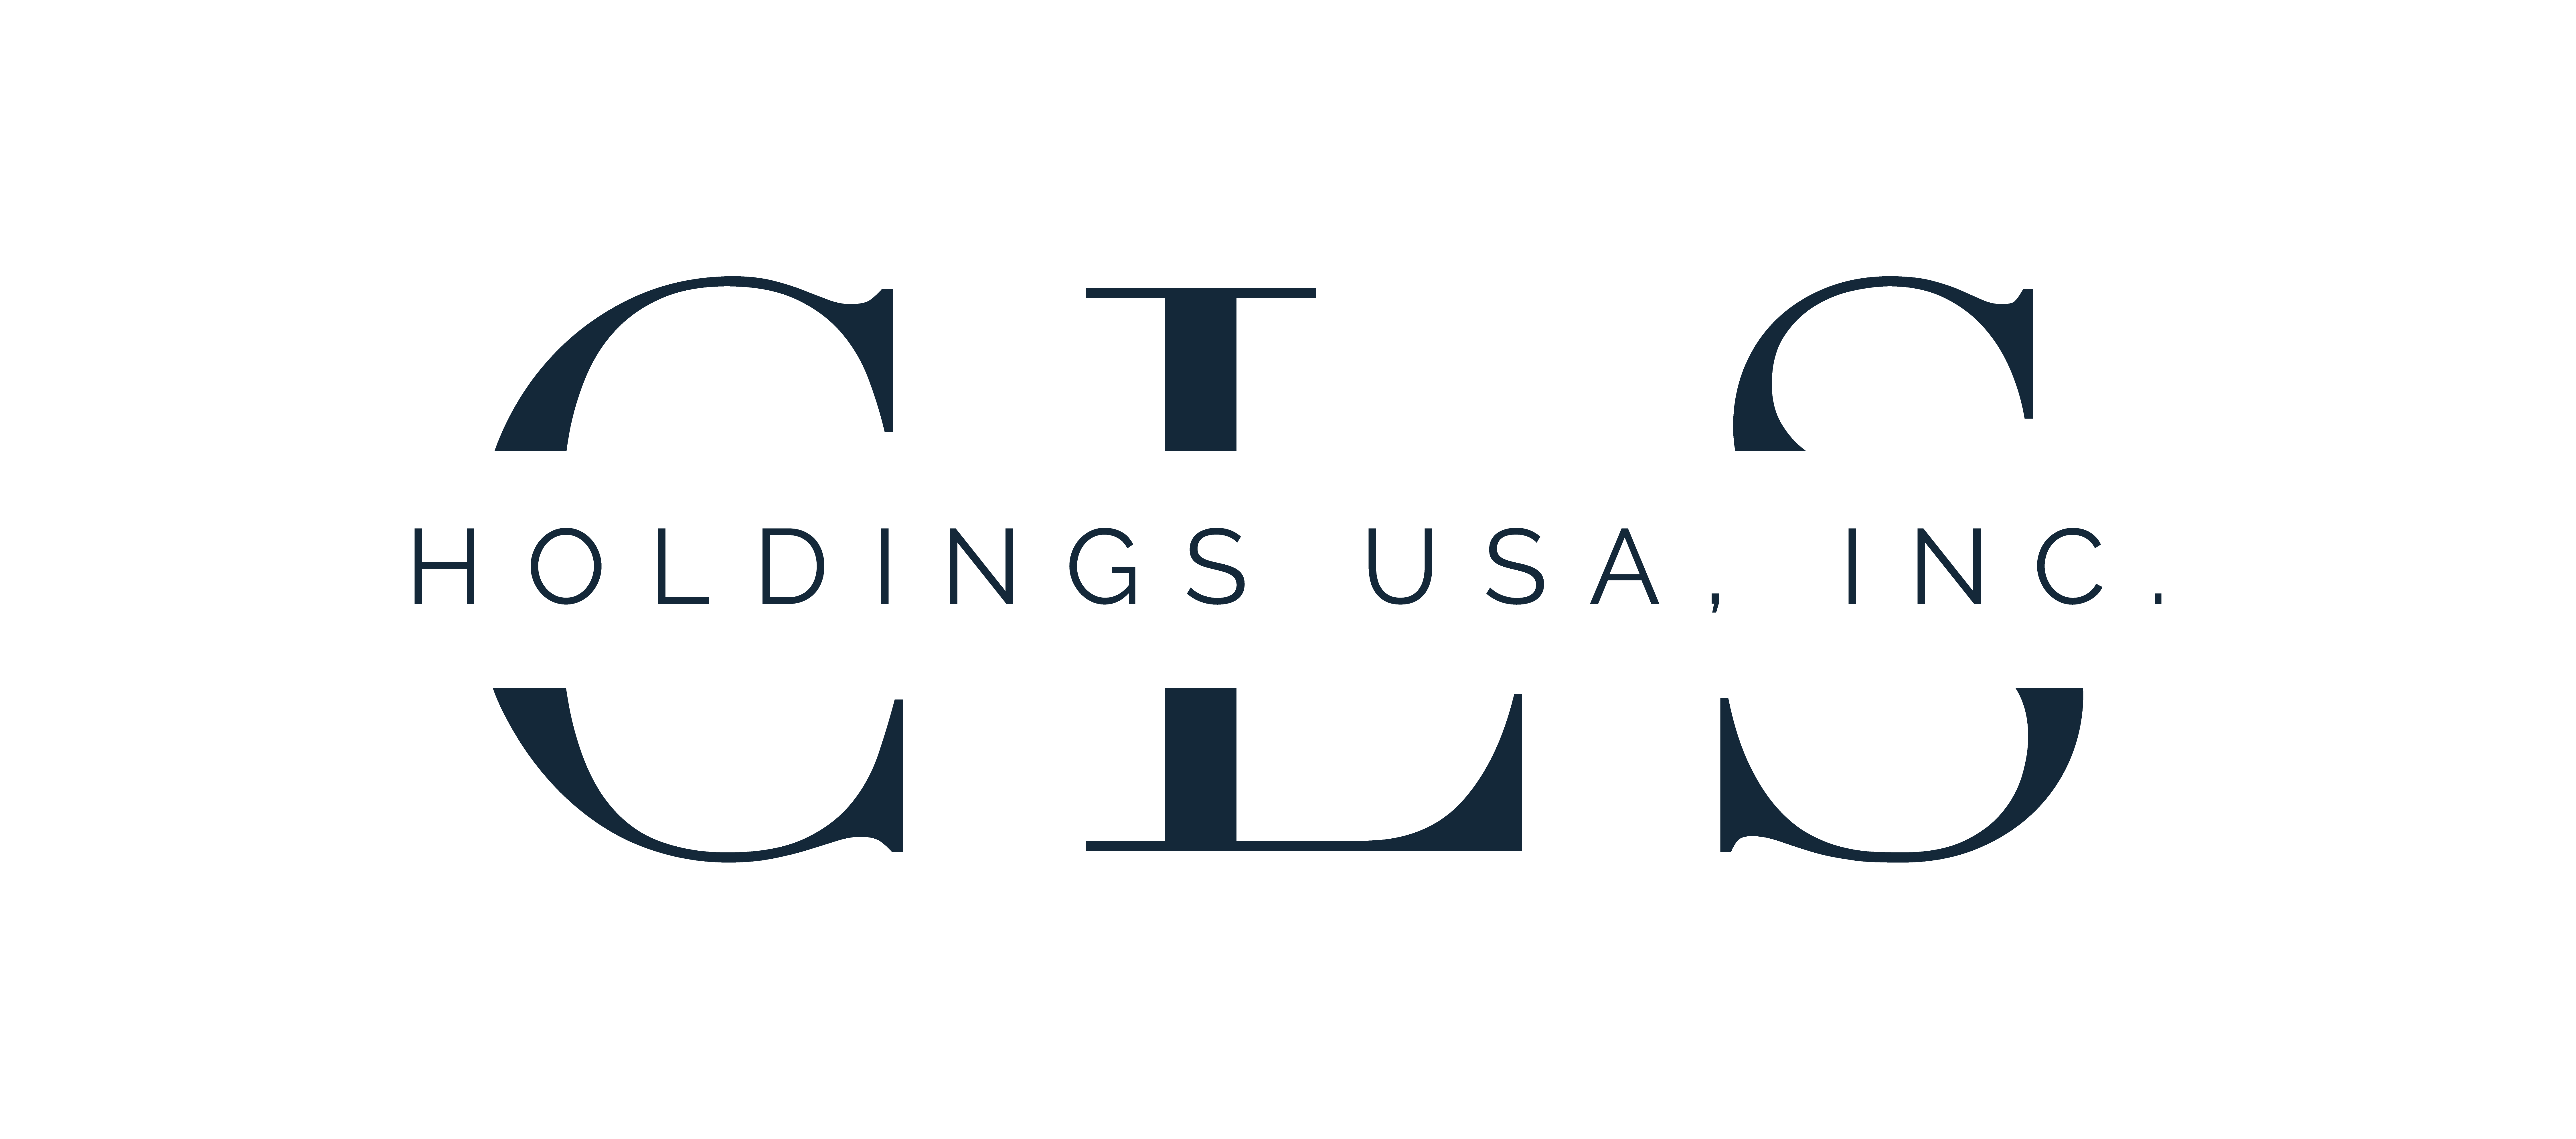 CLS Holdings USA, Inc.